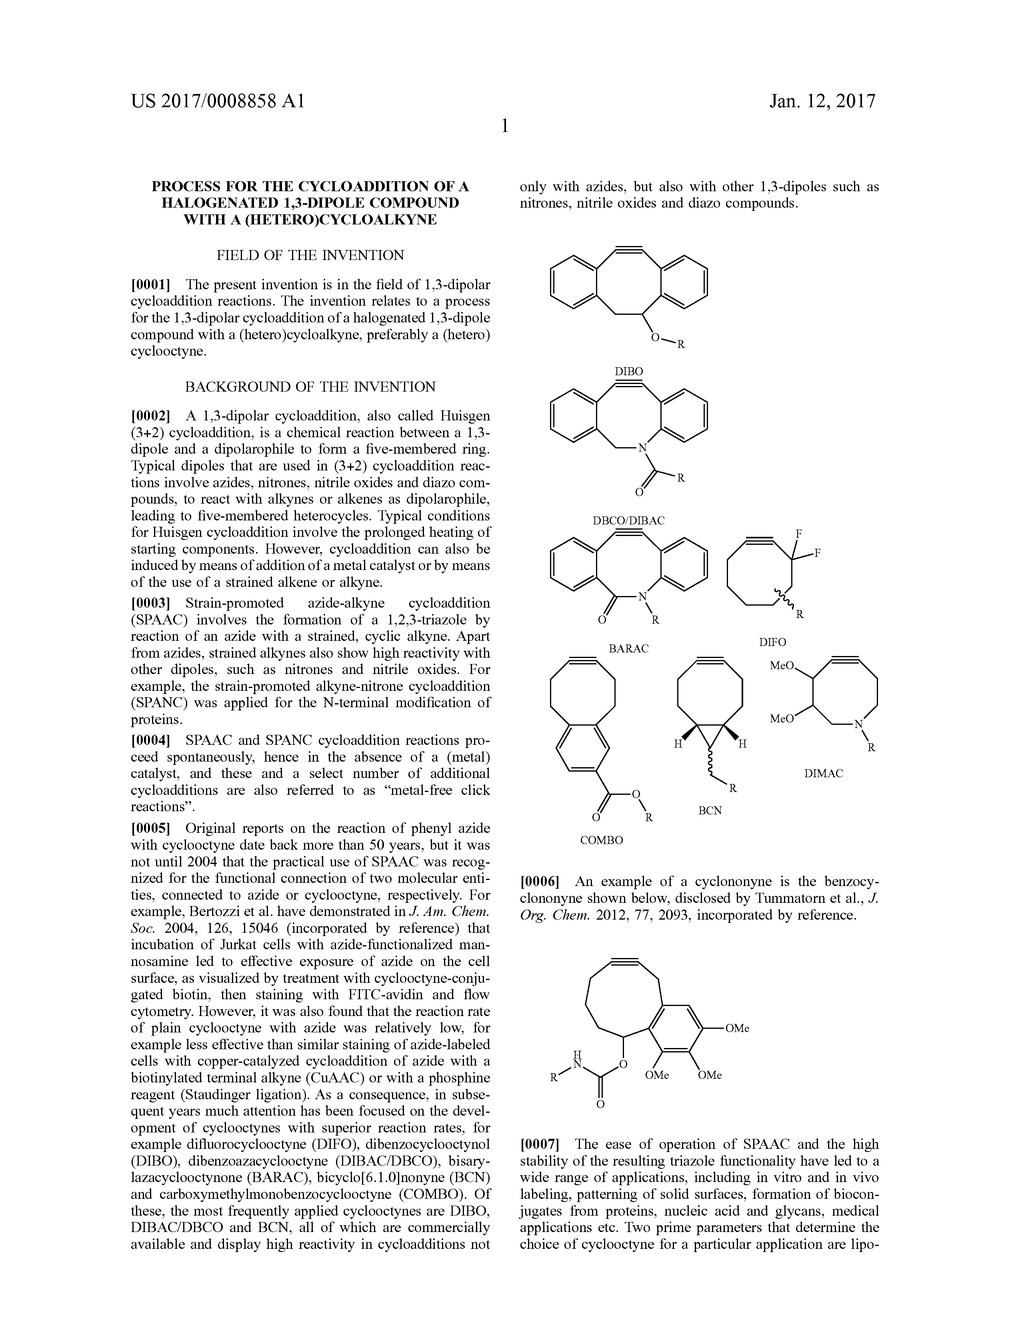 PROCESS FOR THE CYCLOADDITION OF A HALOGENATED 1,3-DIPOLE COMPOUND WITH A     (HETERO)CYCLOALKYNE - diagram, schematic, and image 11